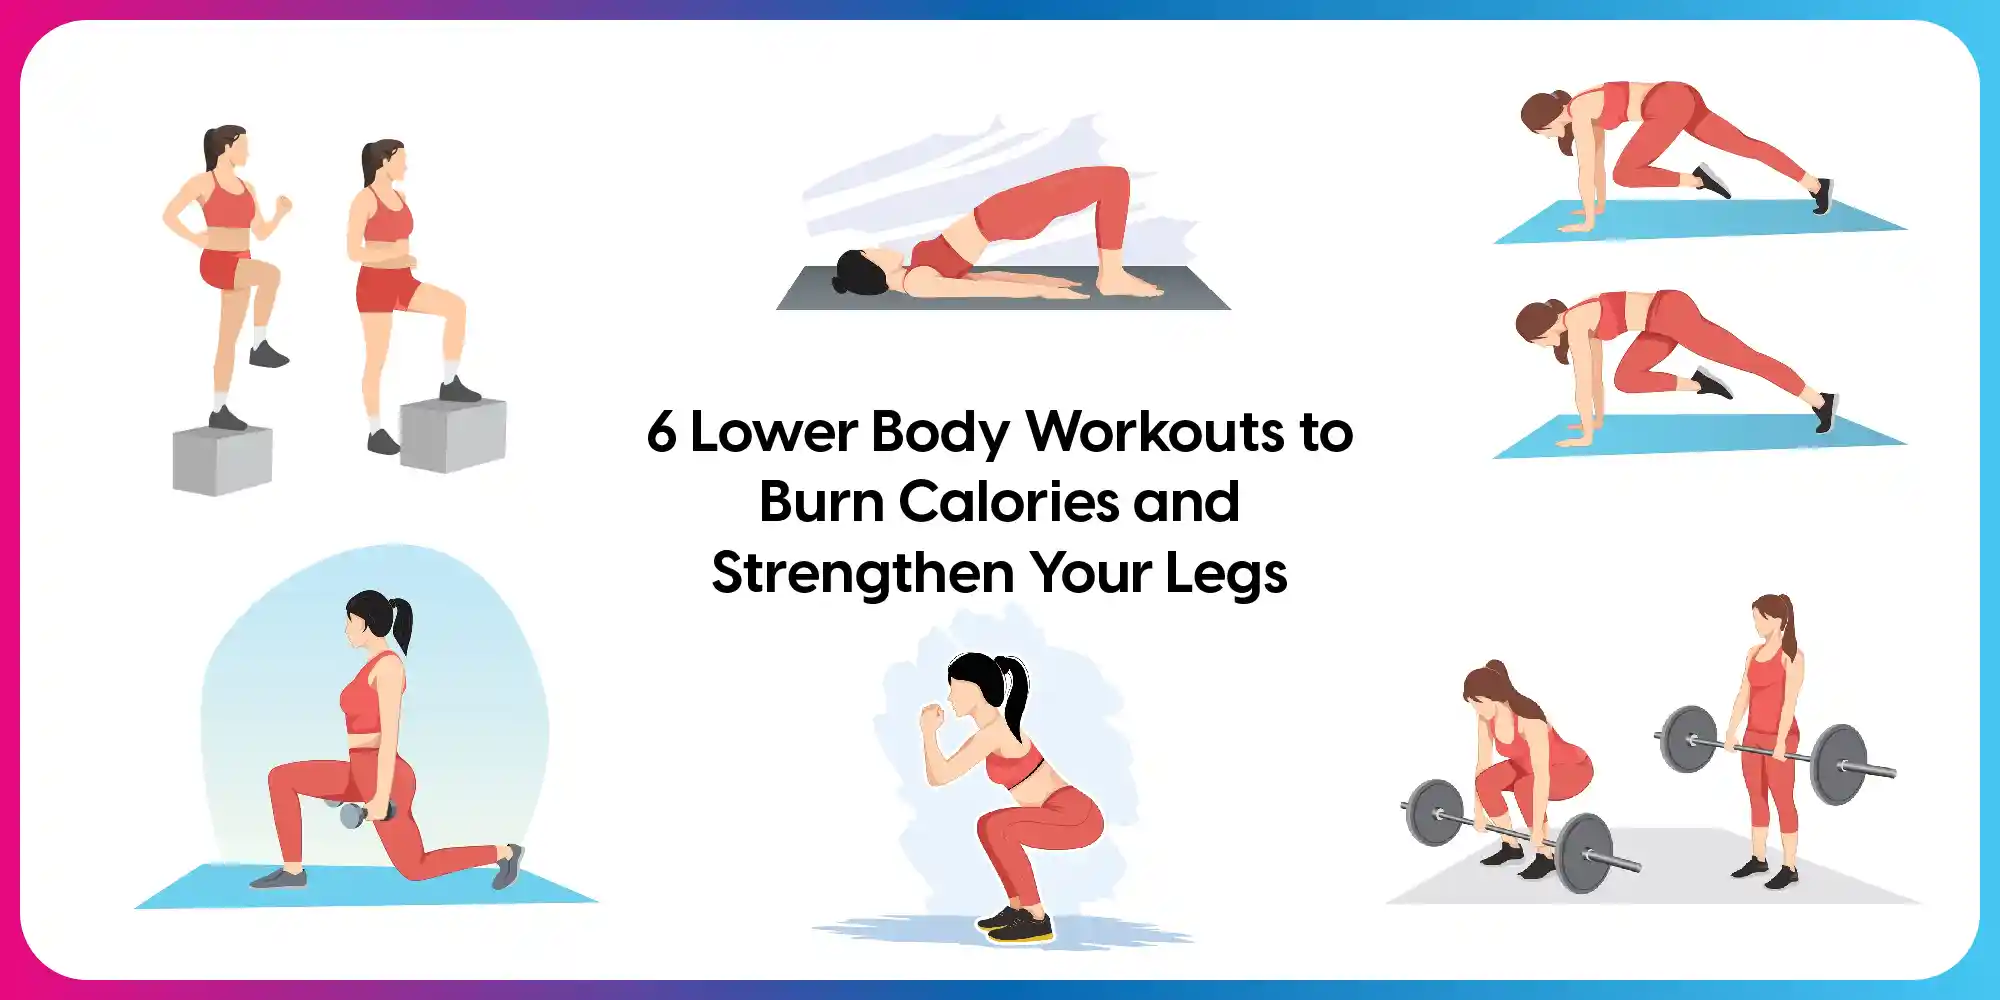 6 Lower Body Workouts to Burn Calories and Strengthen Your Legs